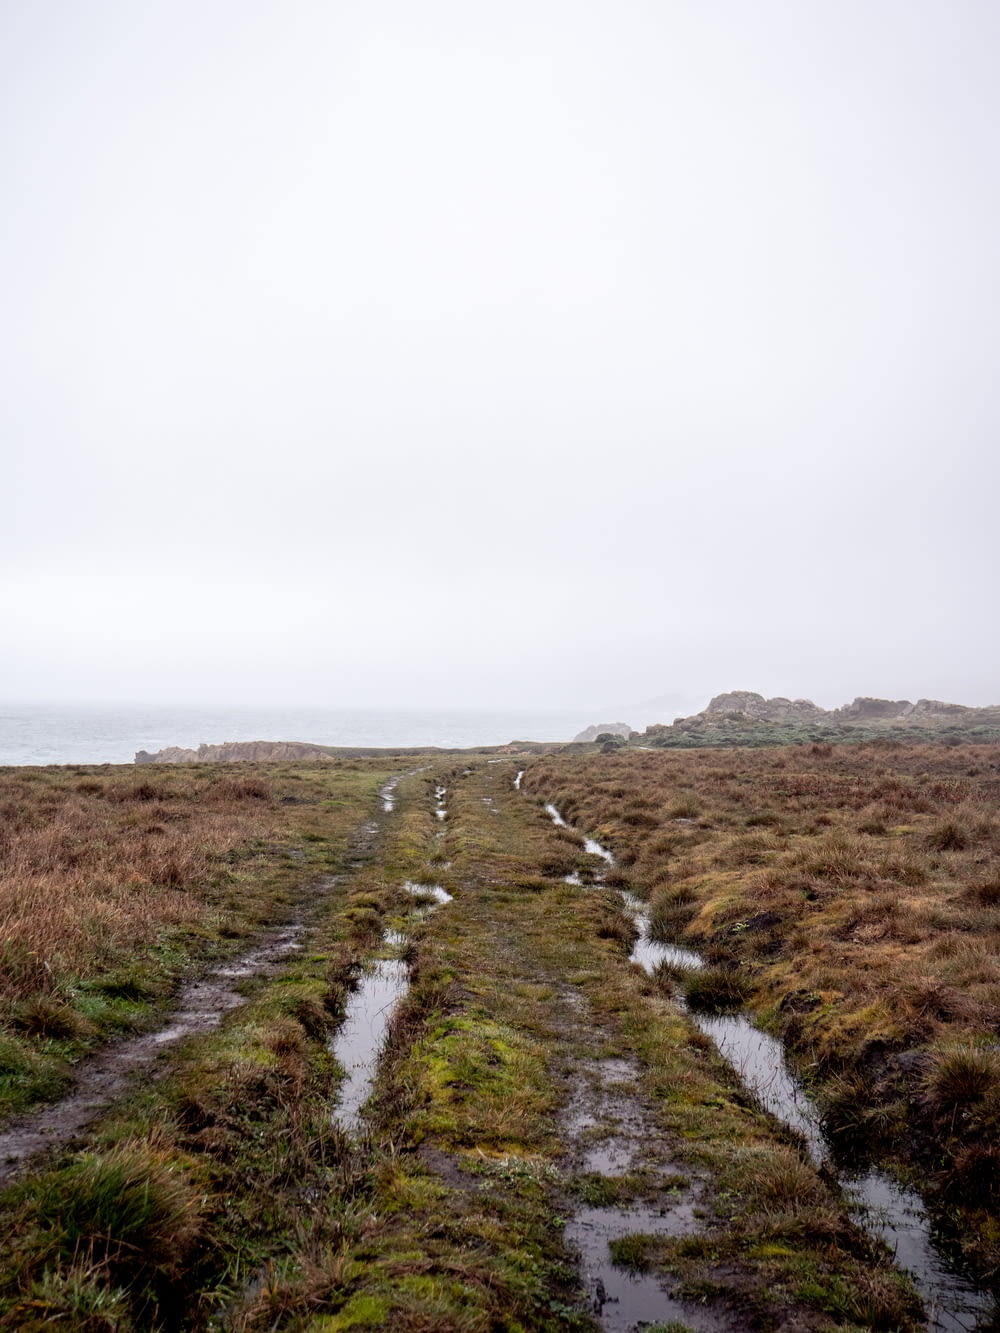 a muddy path in the middle of a grassy field